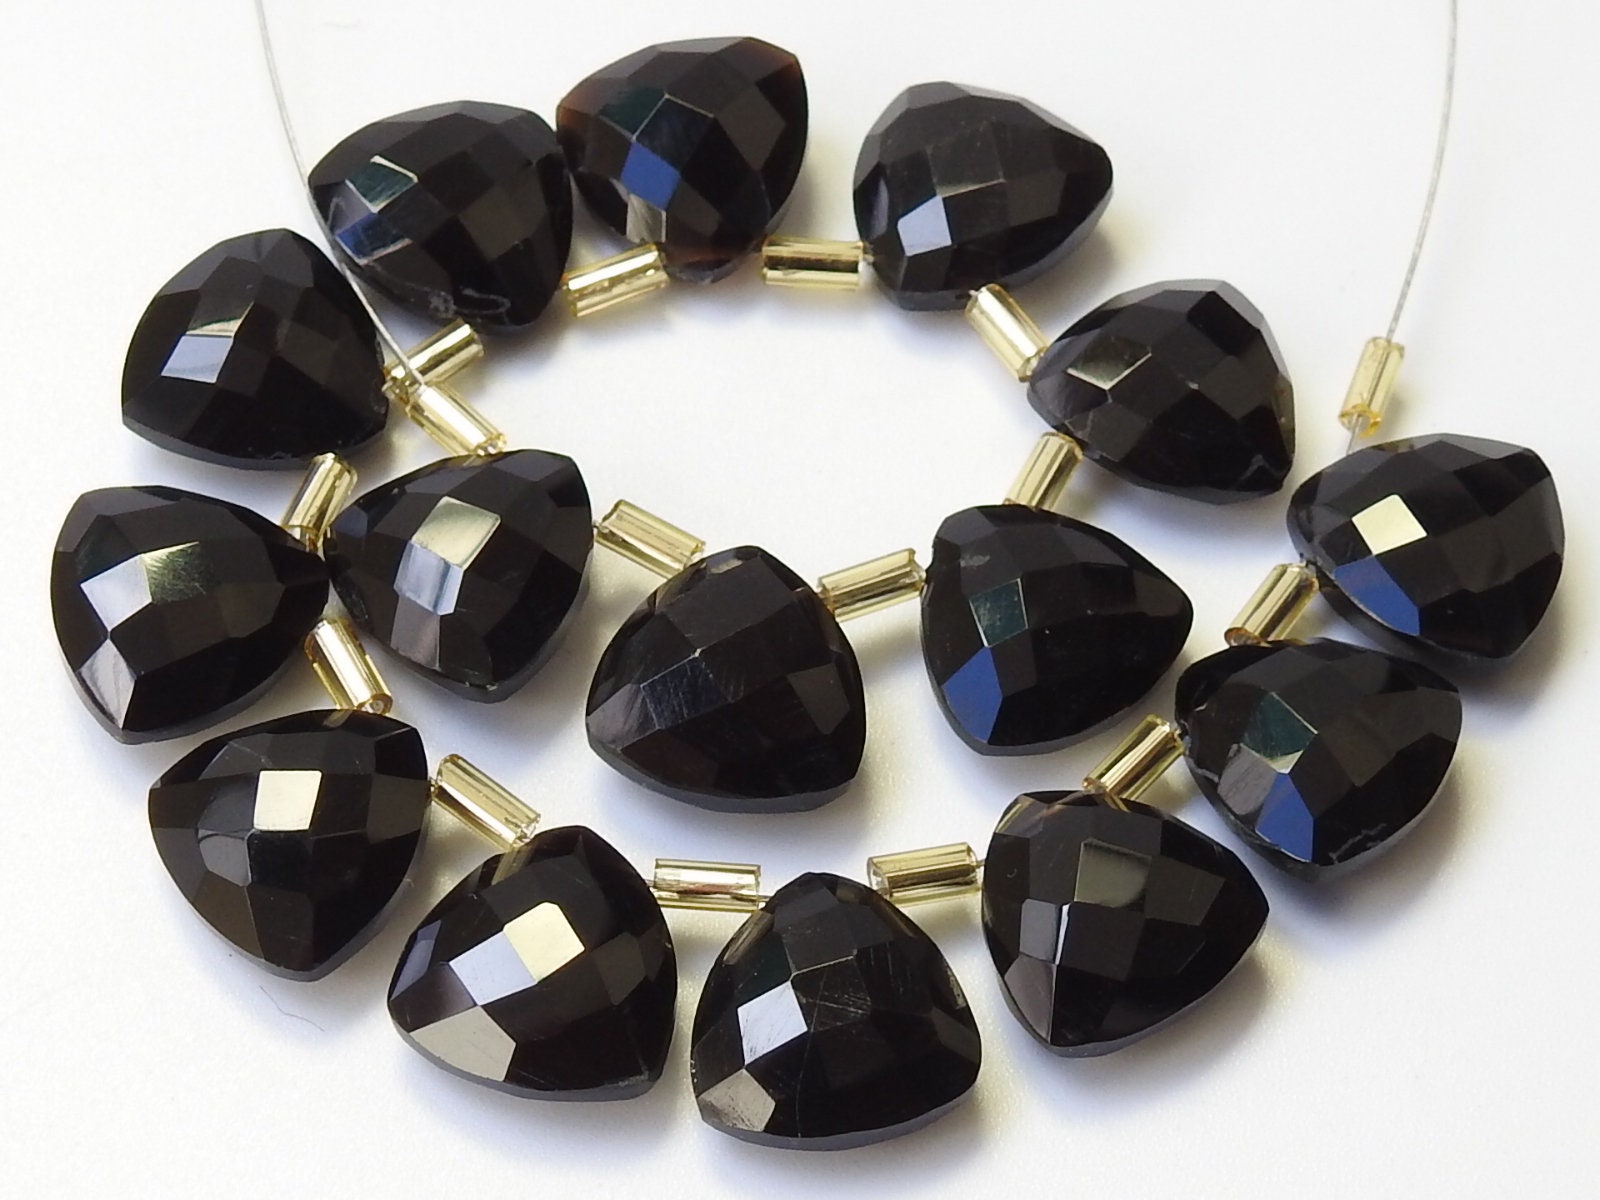 Black Onyx Faceted Trillions,Triangle,Drops,Teardrop,Briolettes,Earring Pair,12X12MM Approx,Wholesaler,Supplies,100%Natural PME-CY2 | Save 33% - Rajasthan Living 15